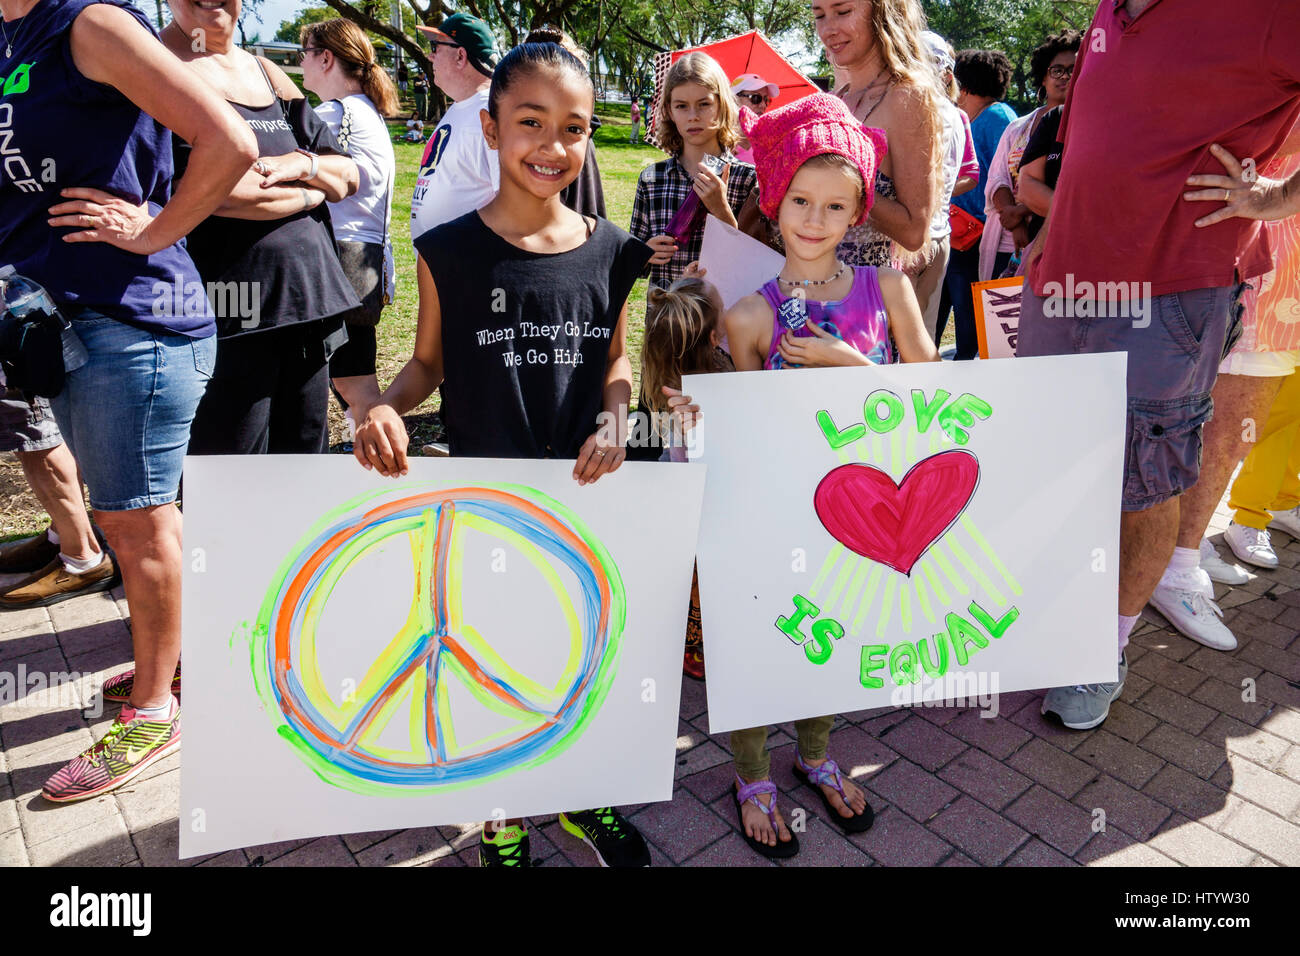 Miami Florida,Downtown,Bayfront Park,Women's March,political protest,march,human rights,advocacy,sign,Black. Girl,holding sign,manifesters,peace symbol Foto Stock